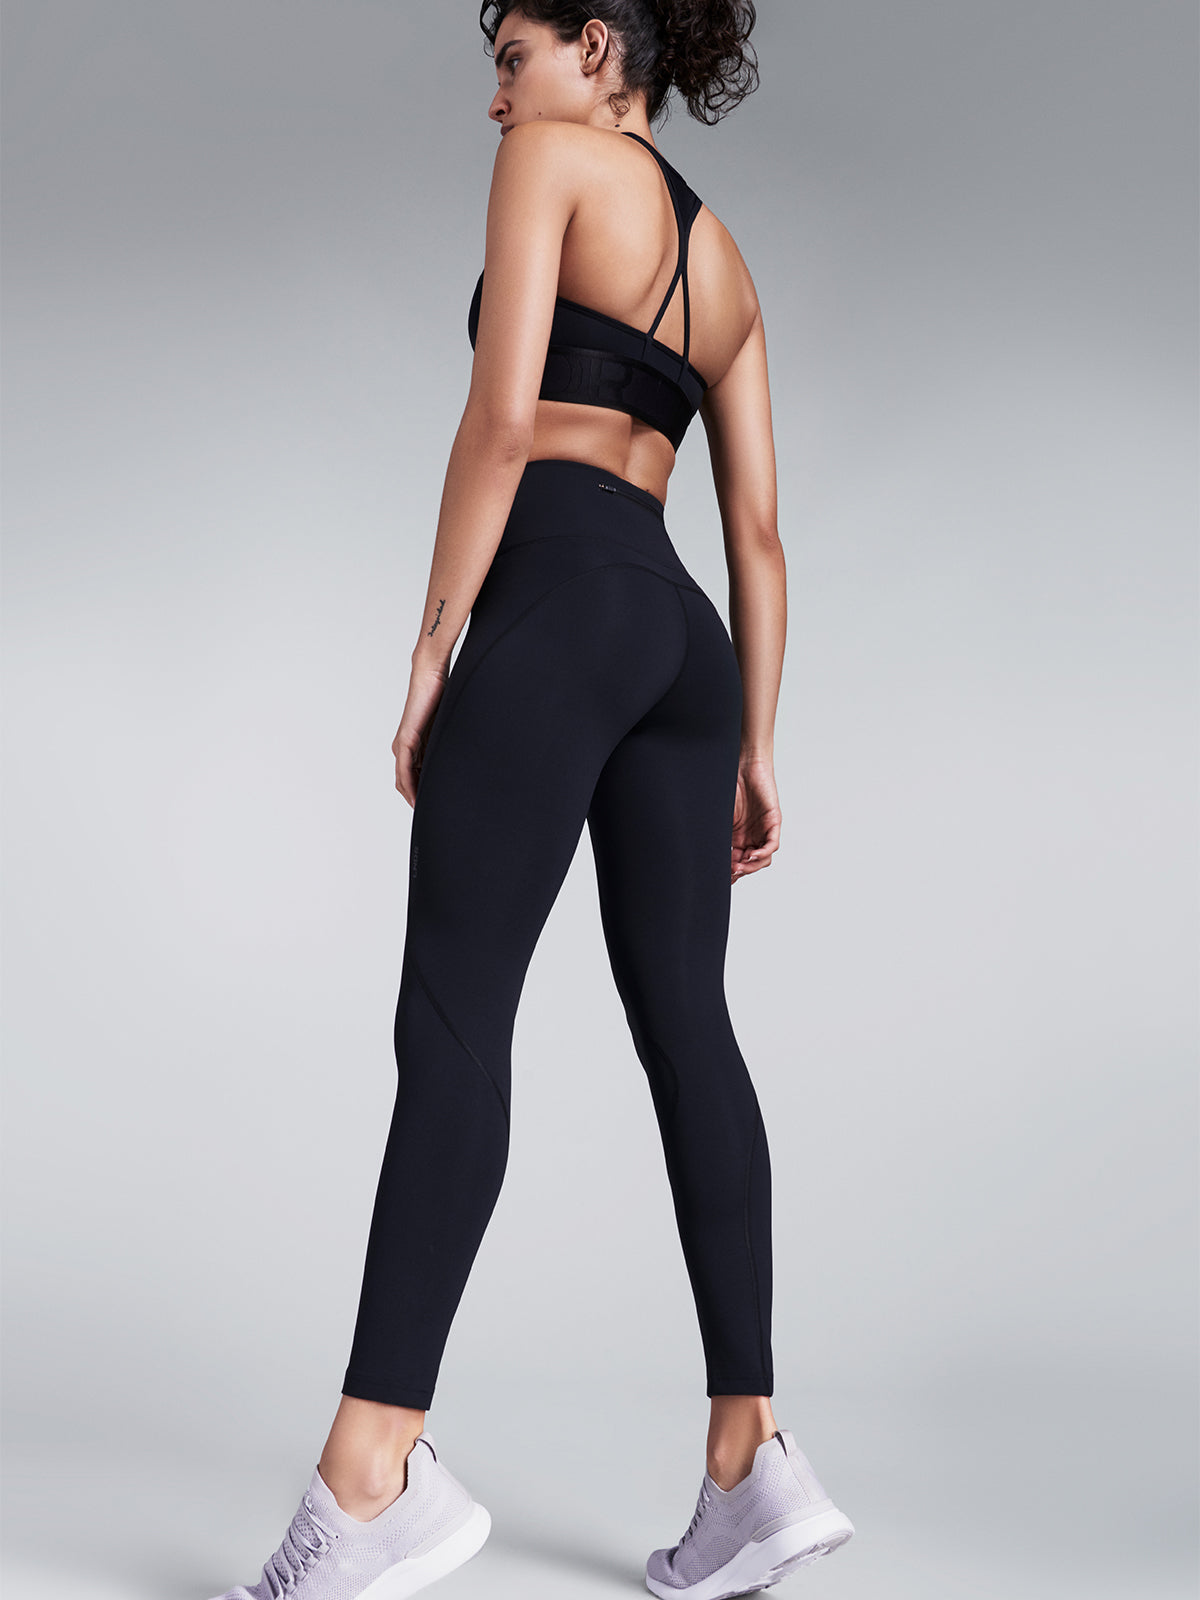 Ultra High-Rise 7/8 Happiness Runs Leggings  Athleisure photoshoot,  Activewear photography, Women fitness photography